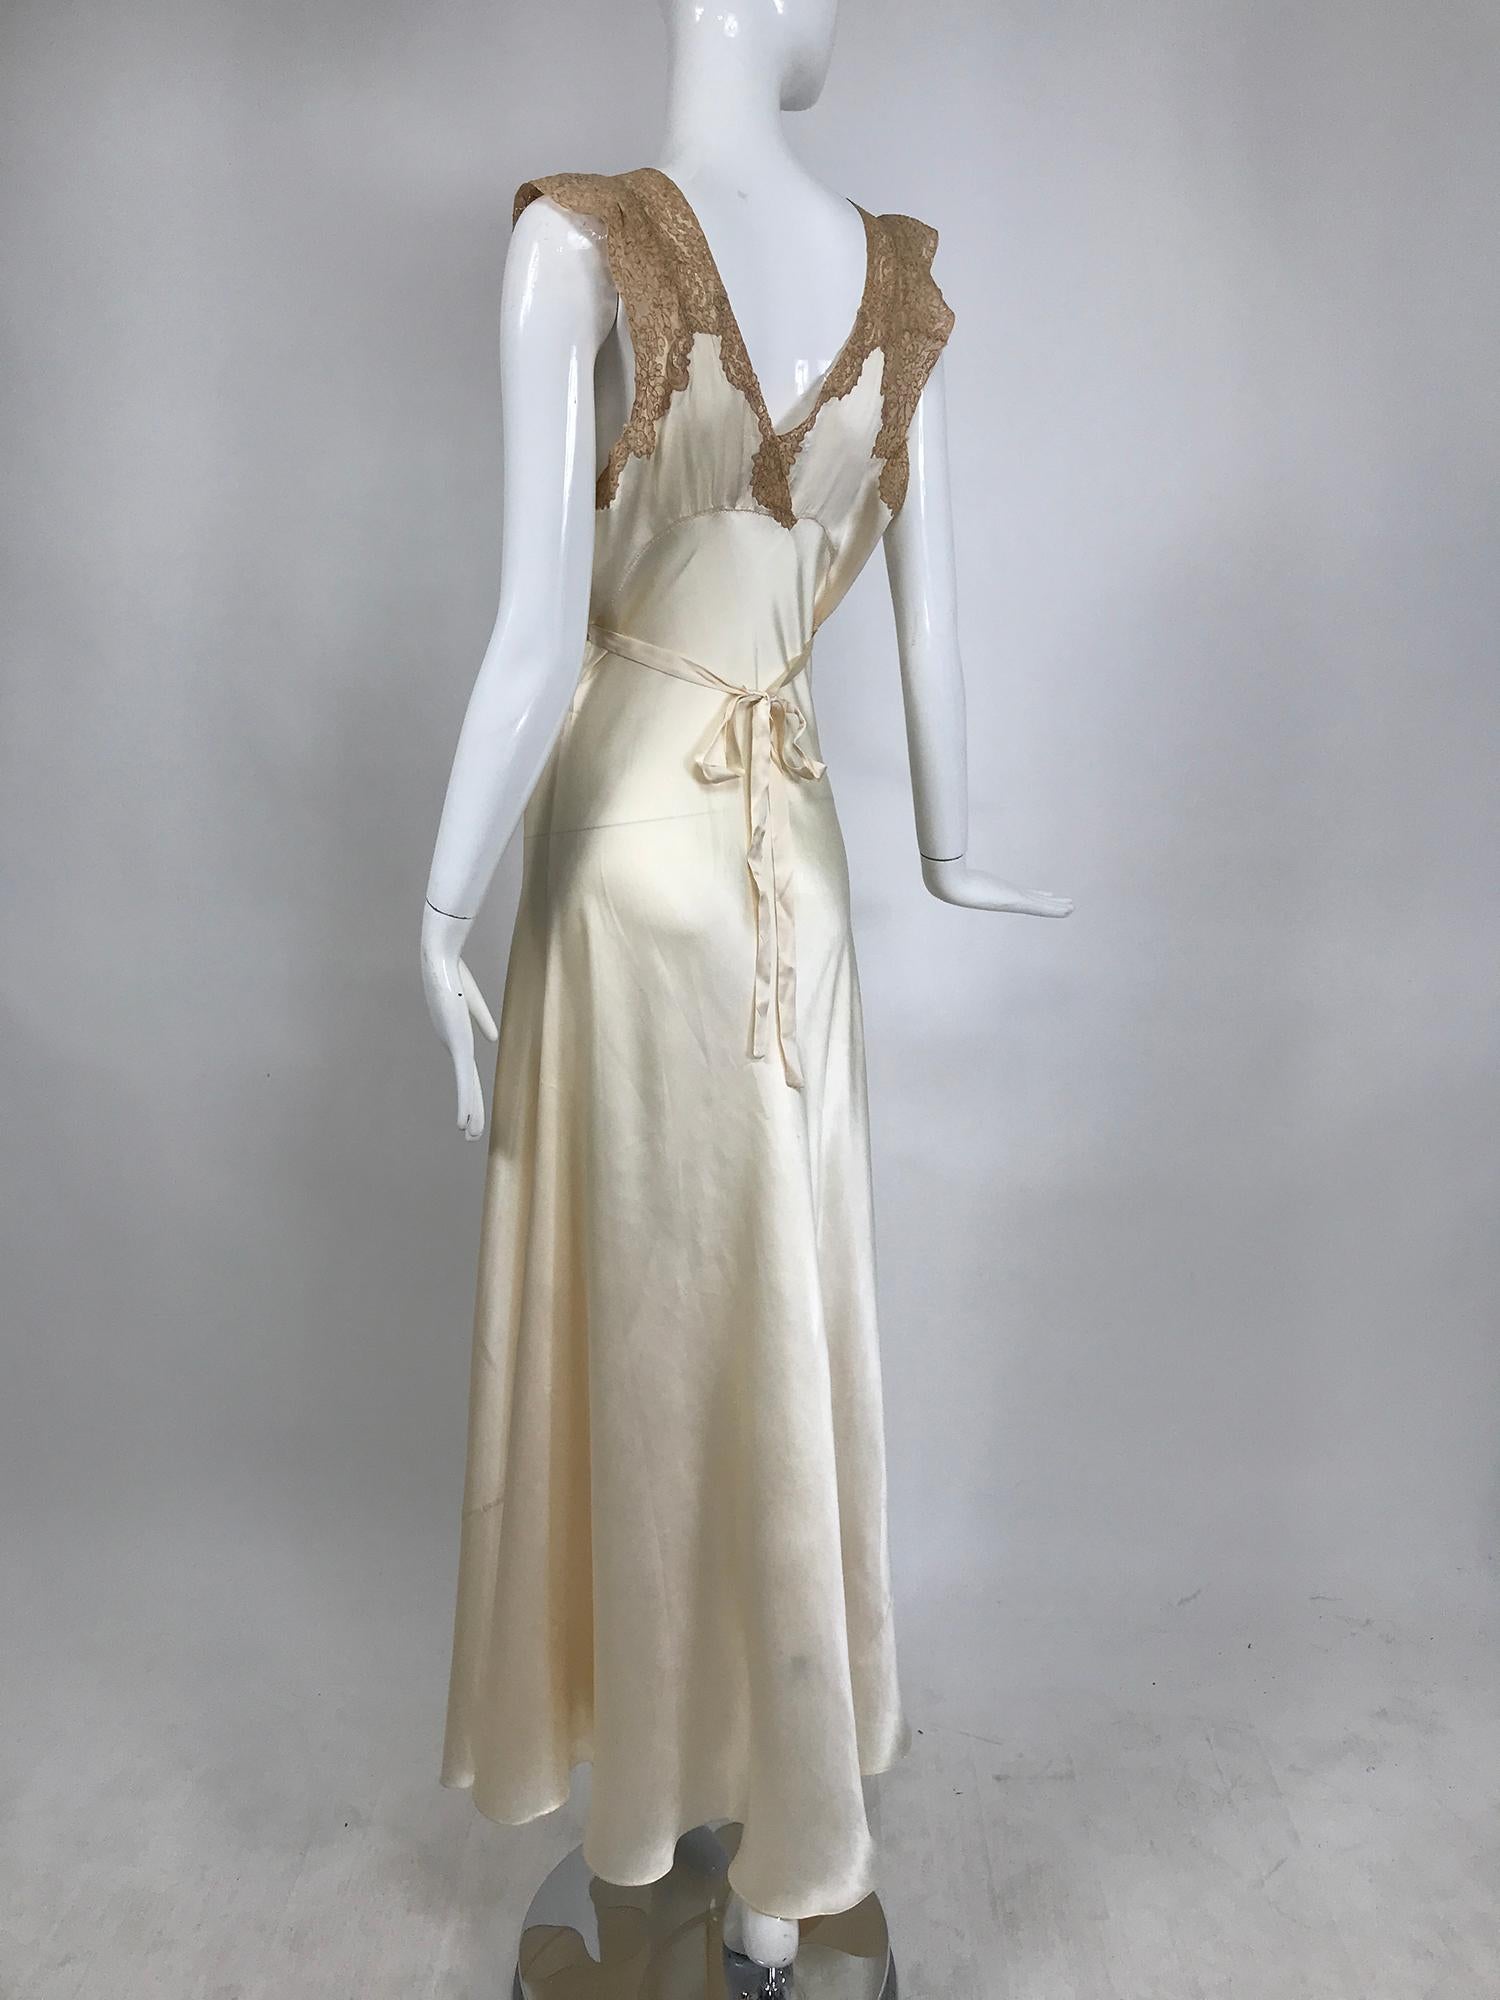 Women's 1930s Cream Silk Charmeuse Bias Cut Couture Gown With Ecru Lace Trim